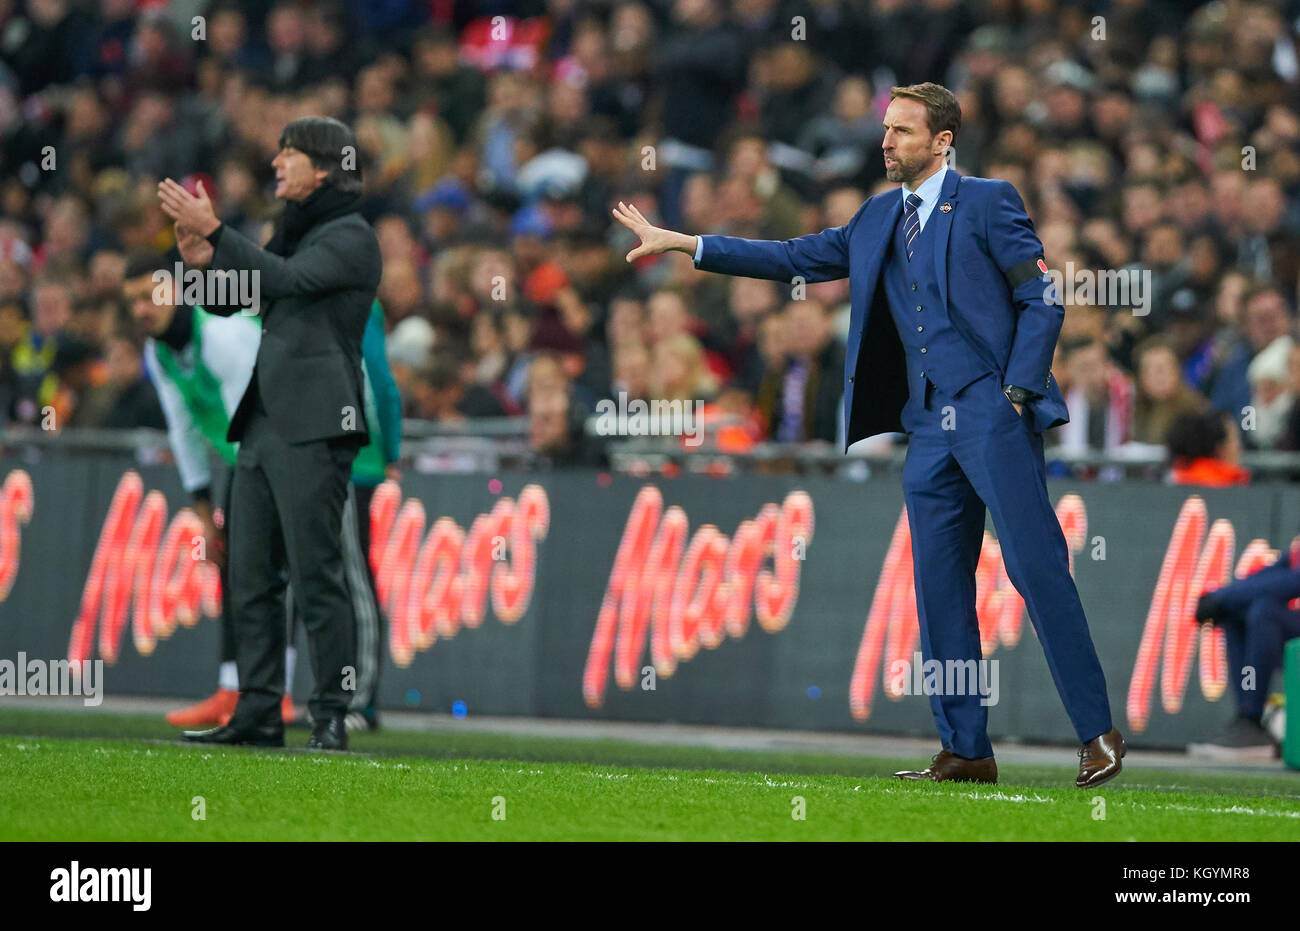 Soccer friendly match, London, November 10, 2017 Gareth Southgate,  Nationalcoach, headcoach,  England Gesticulates and giving instructions, action, single image, gesture, gesture, hand movement, pointing, interpret, mimik,  DFB Nationalcoach, headcoach,  Joachim Jogi LOEW, LÖW, ENGLAND - GERMANY  0-0 World Cup 2018 preparation match in Wembley London, United Kingdom, November 10, 2017,  Season 2017/2018 © Peter Schatz / Alamy Live News Stock Photo